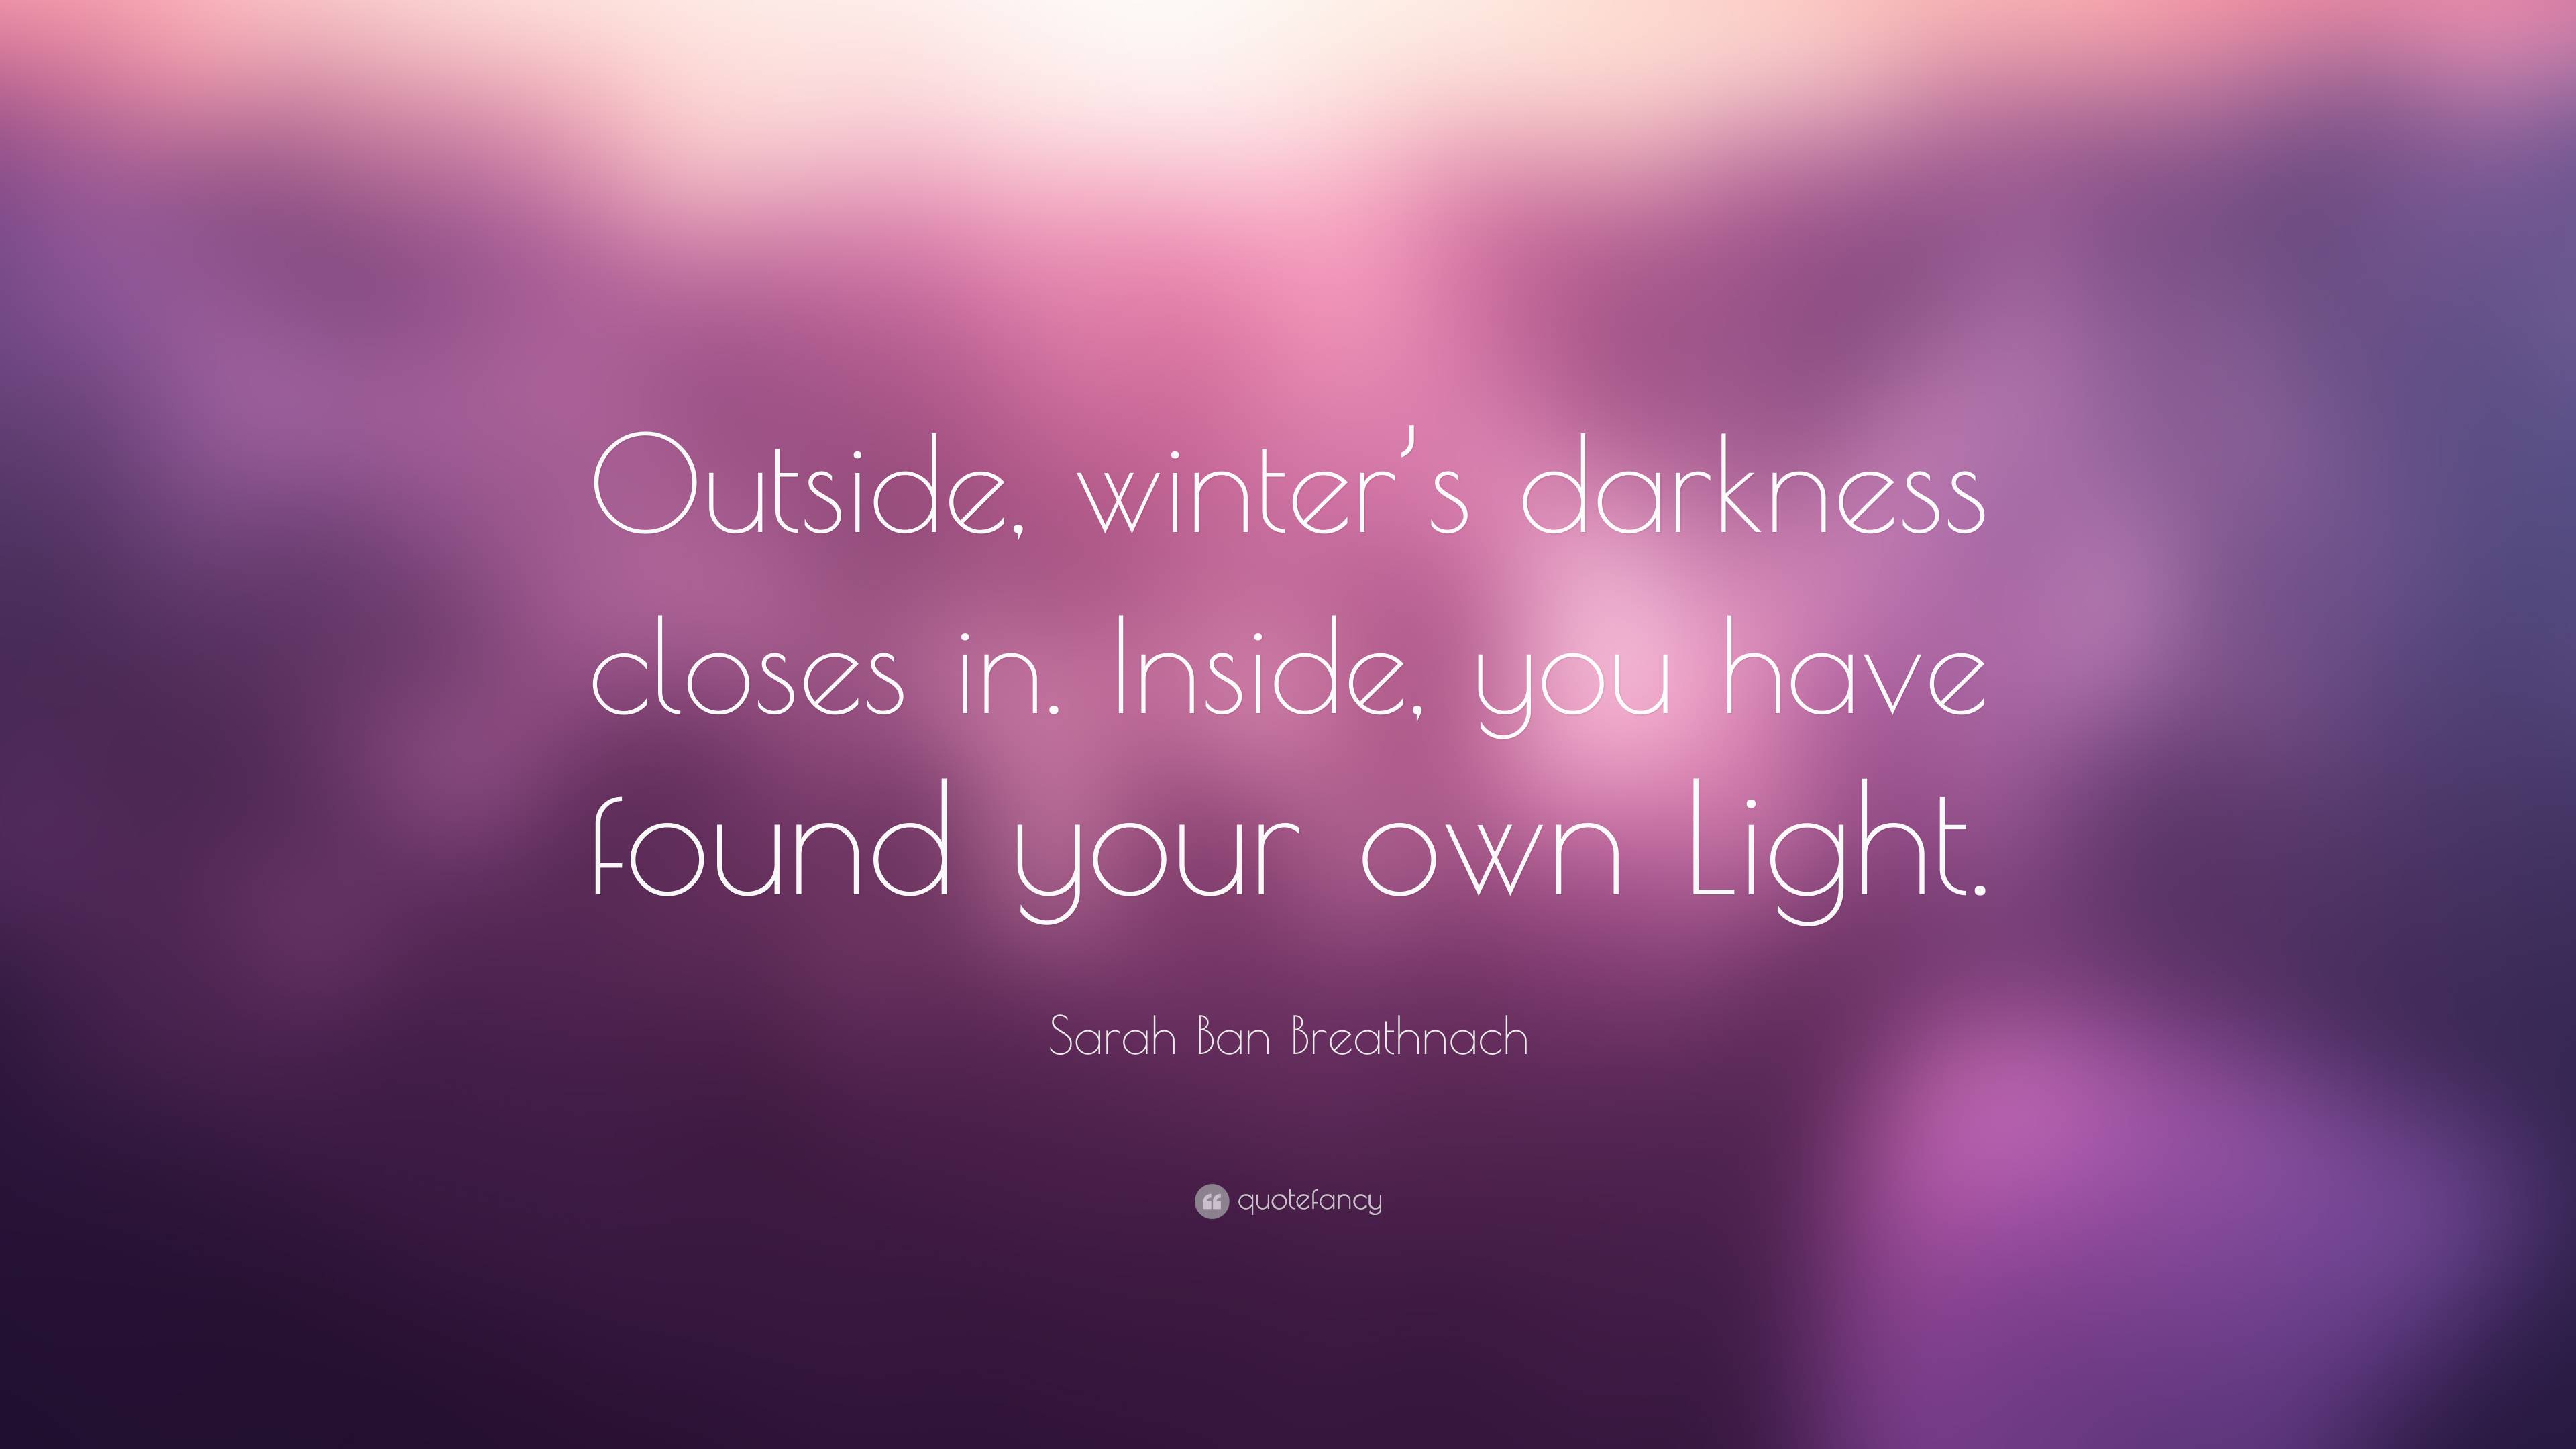 Sarah Ban Breathnach Quote: “Outside, winter’s darkness closes in ...